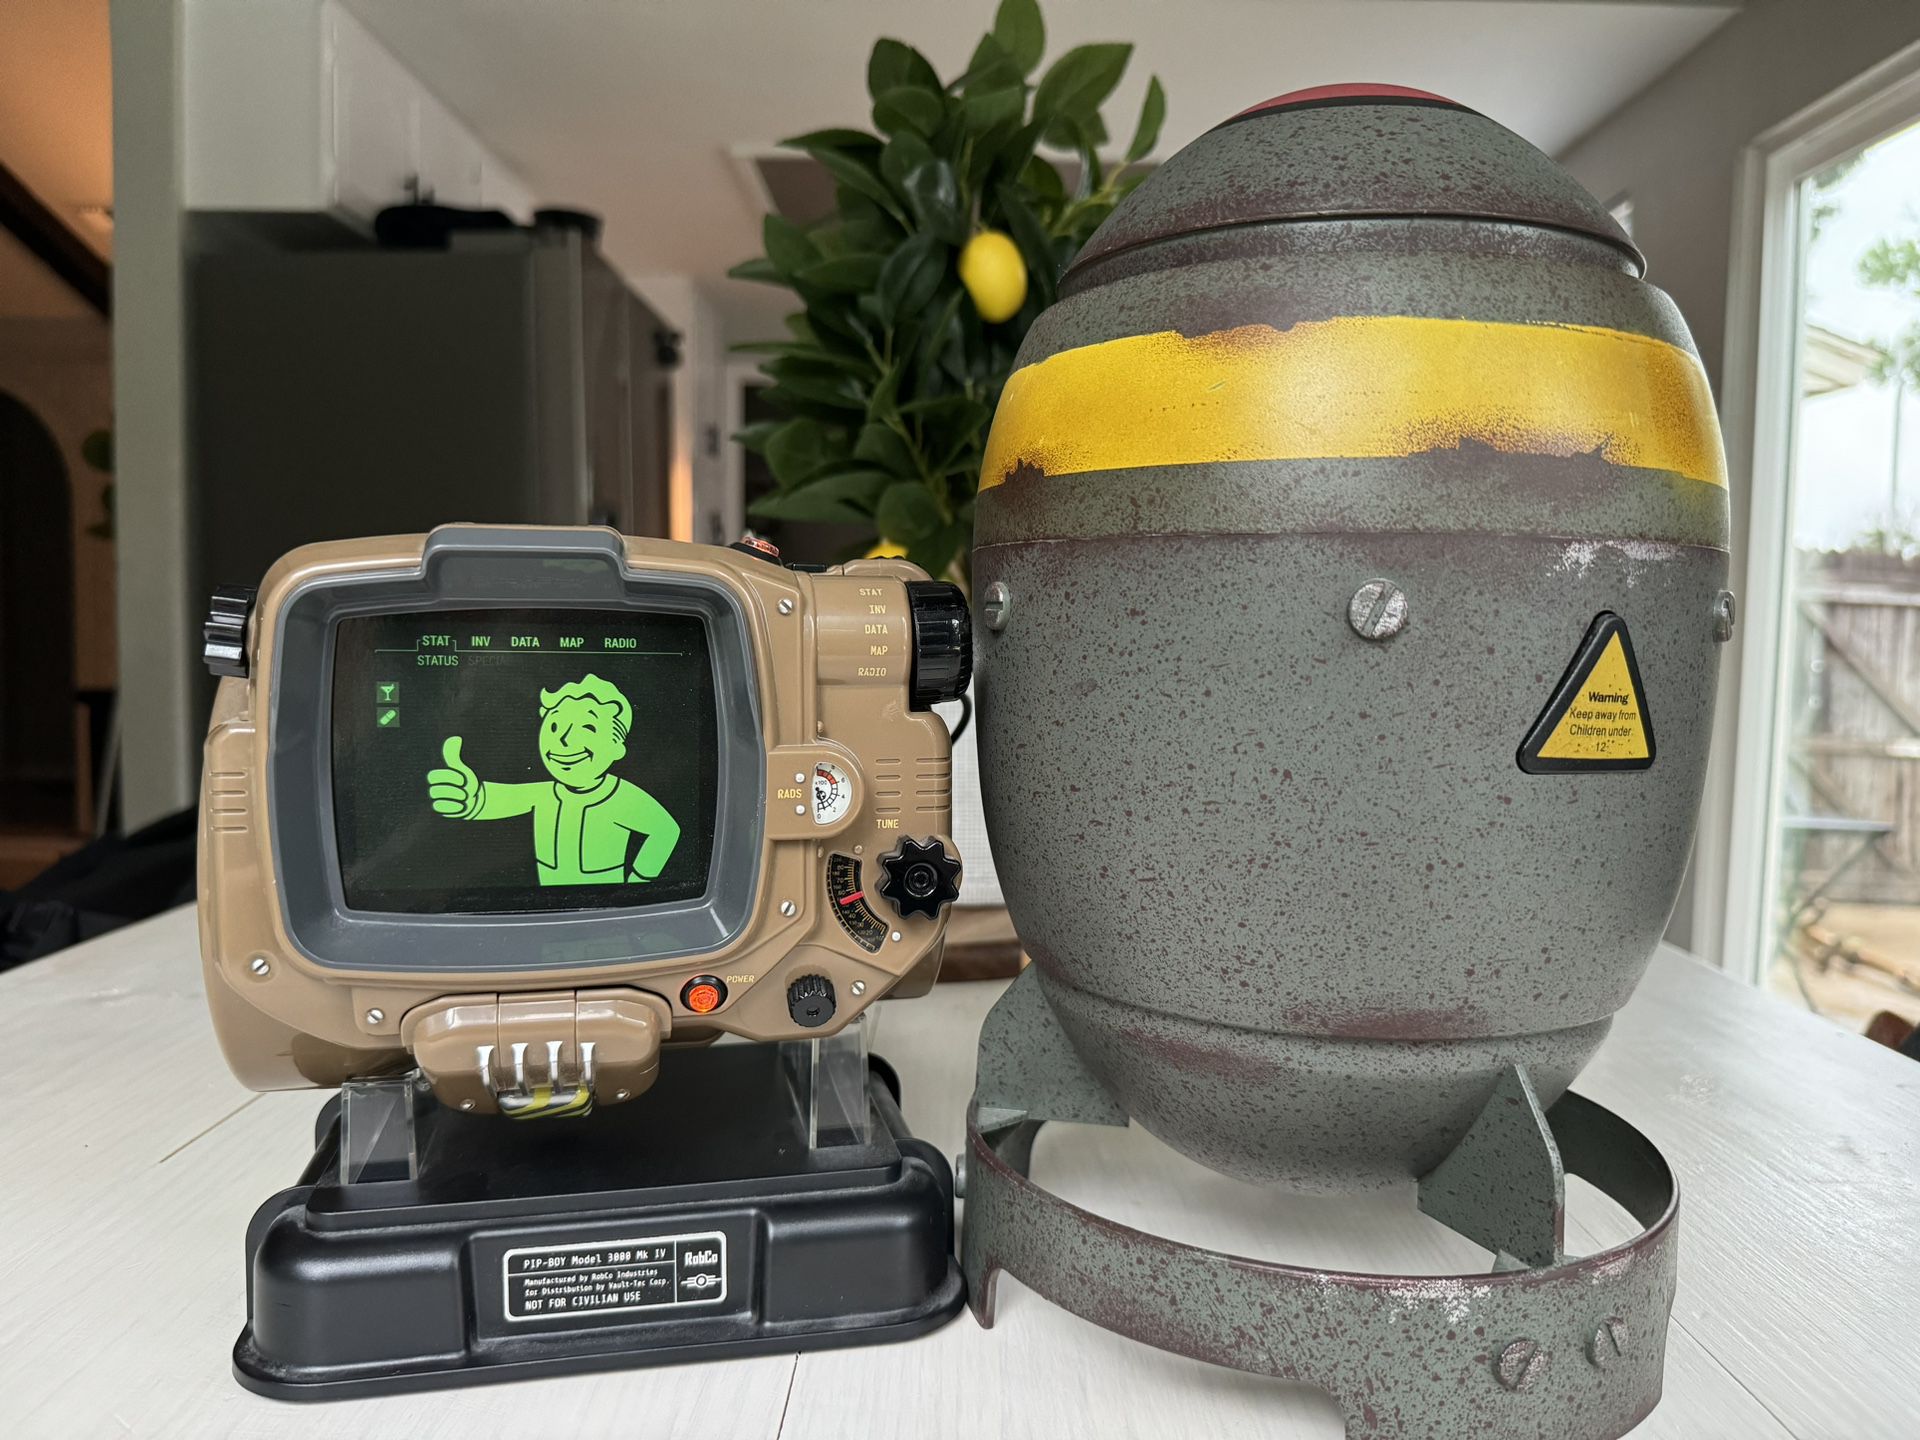 Fallout 4 Game of the year edition pip-boy model 3000 Mk IV and mini nuke